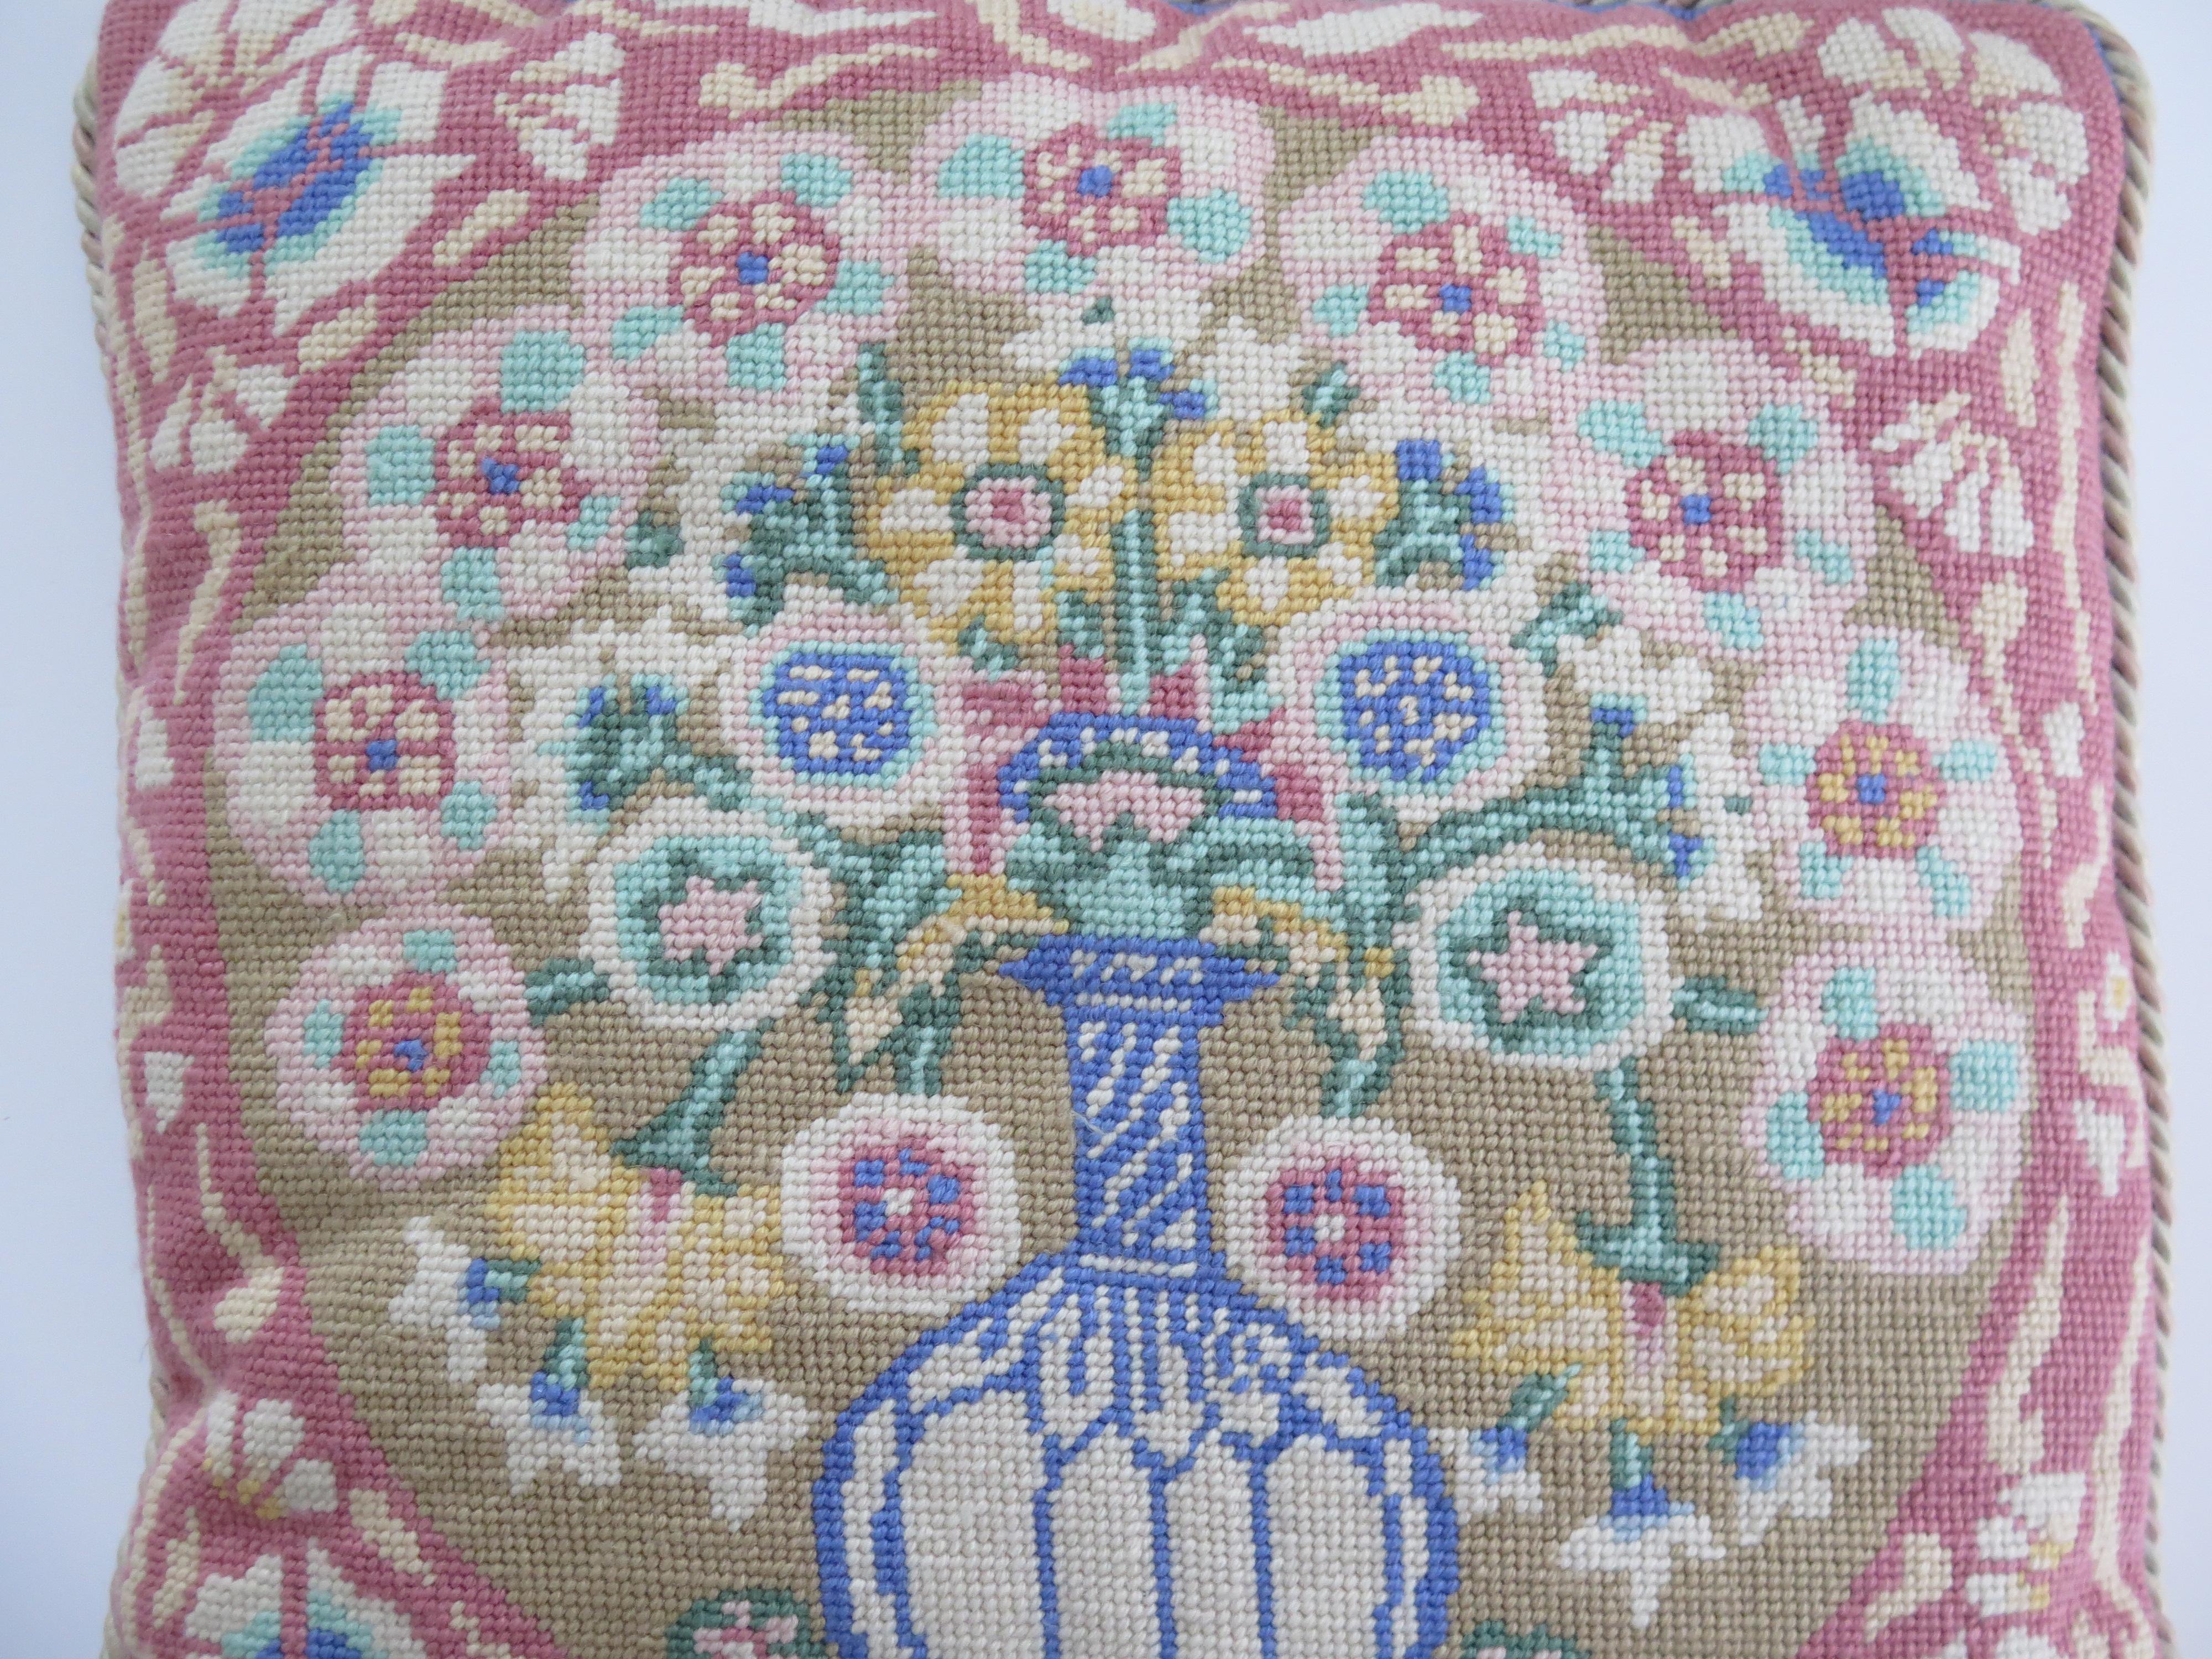 Woven Cushion or Pillow with Flower Vase pattern in pastel shades, Circa 1930s For Sale 3